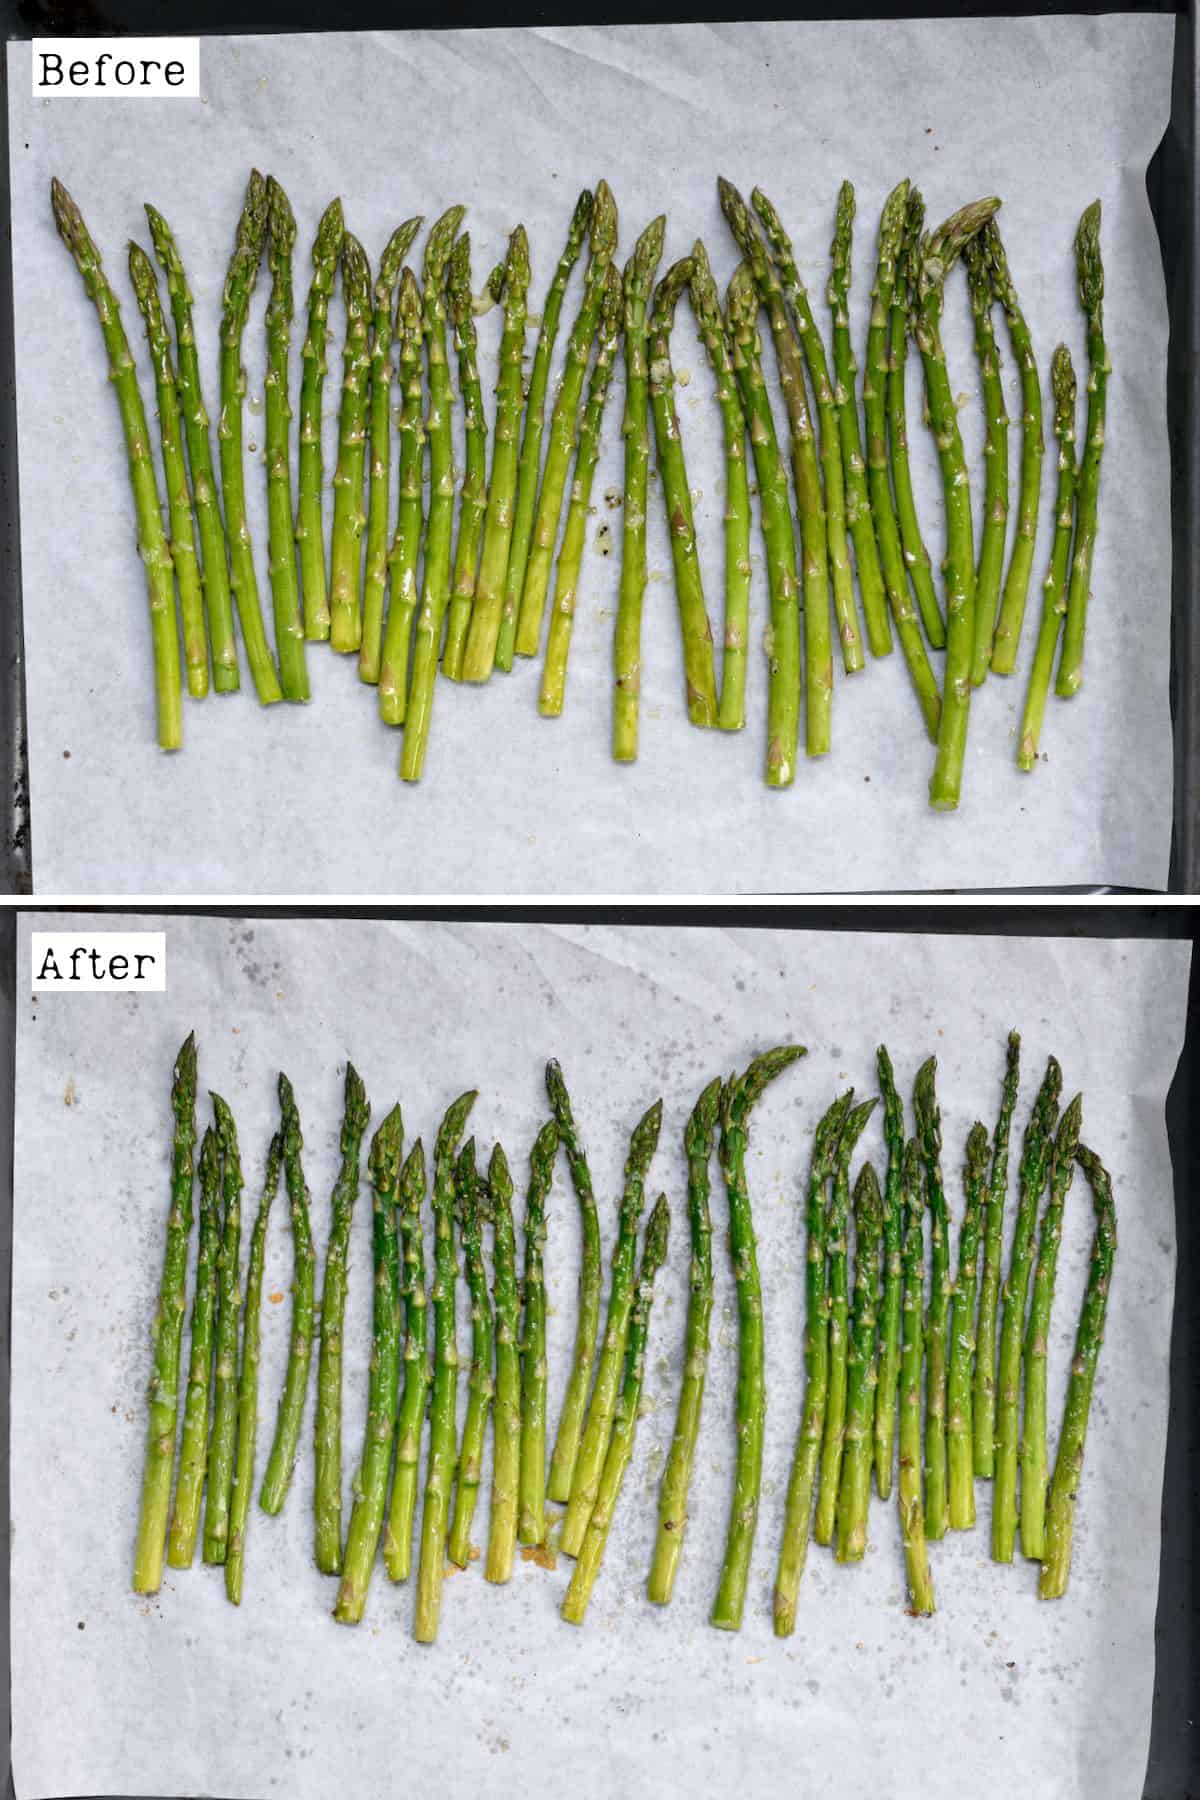 Before and after roasting asparagus